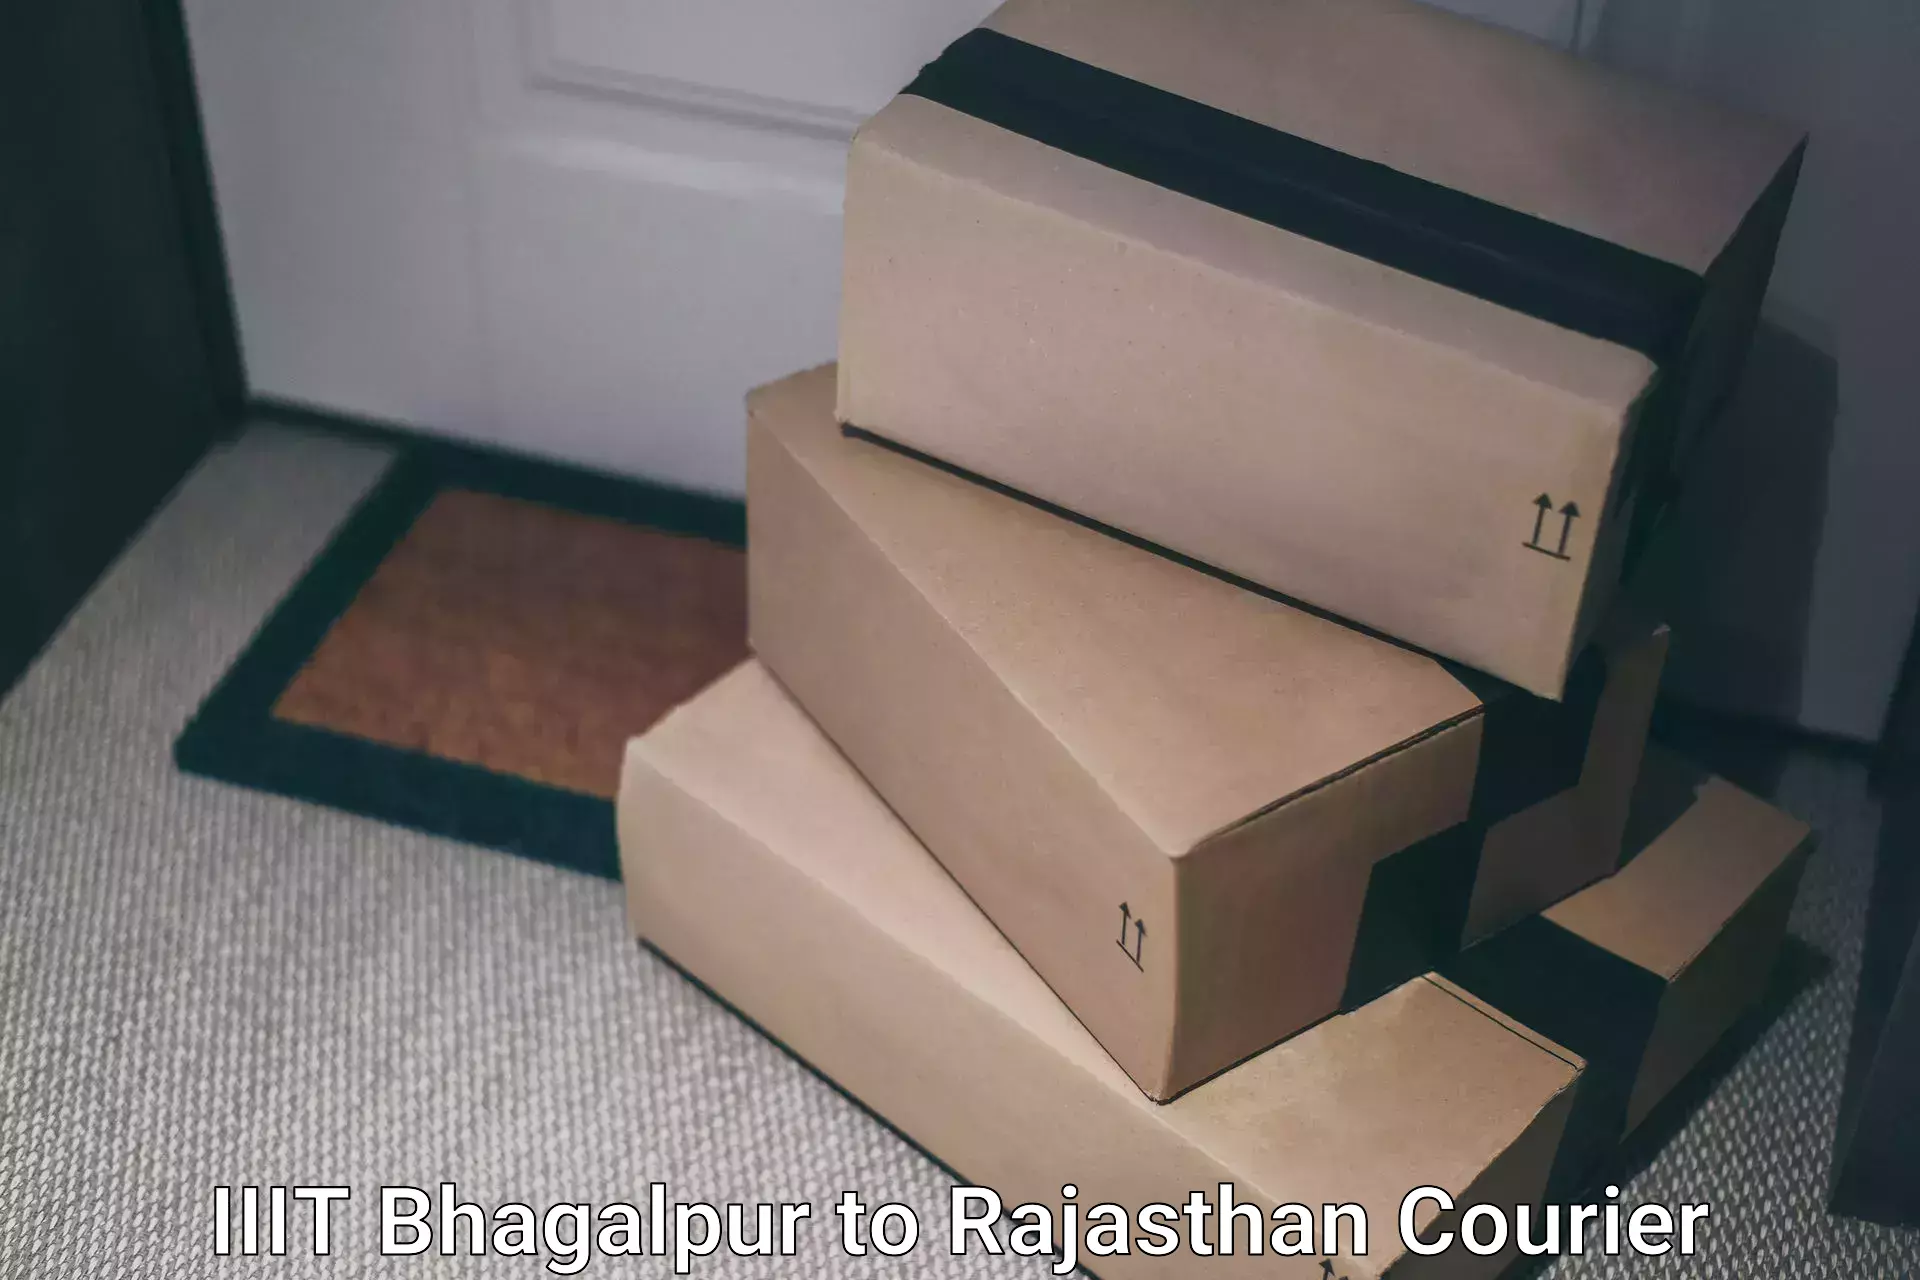 Holiday shipping services IIIT Bhagalpur to Rajasthan